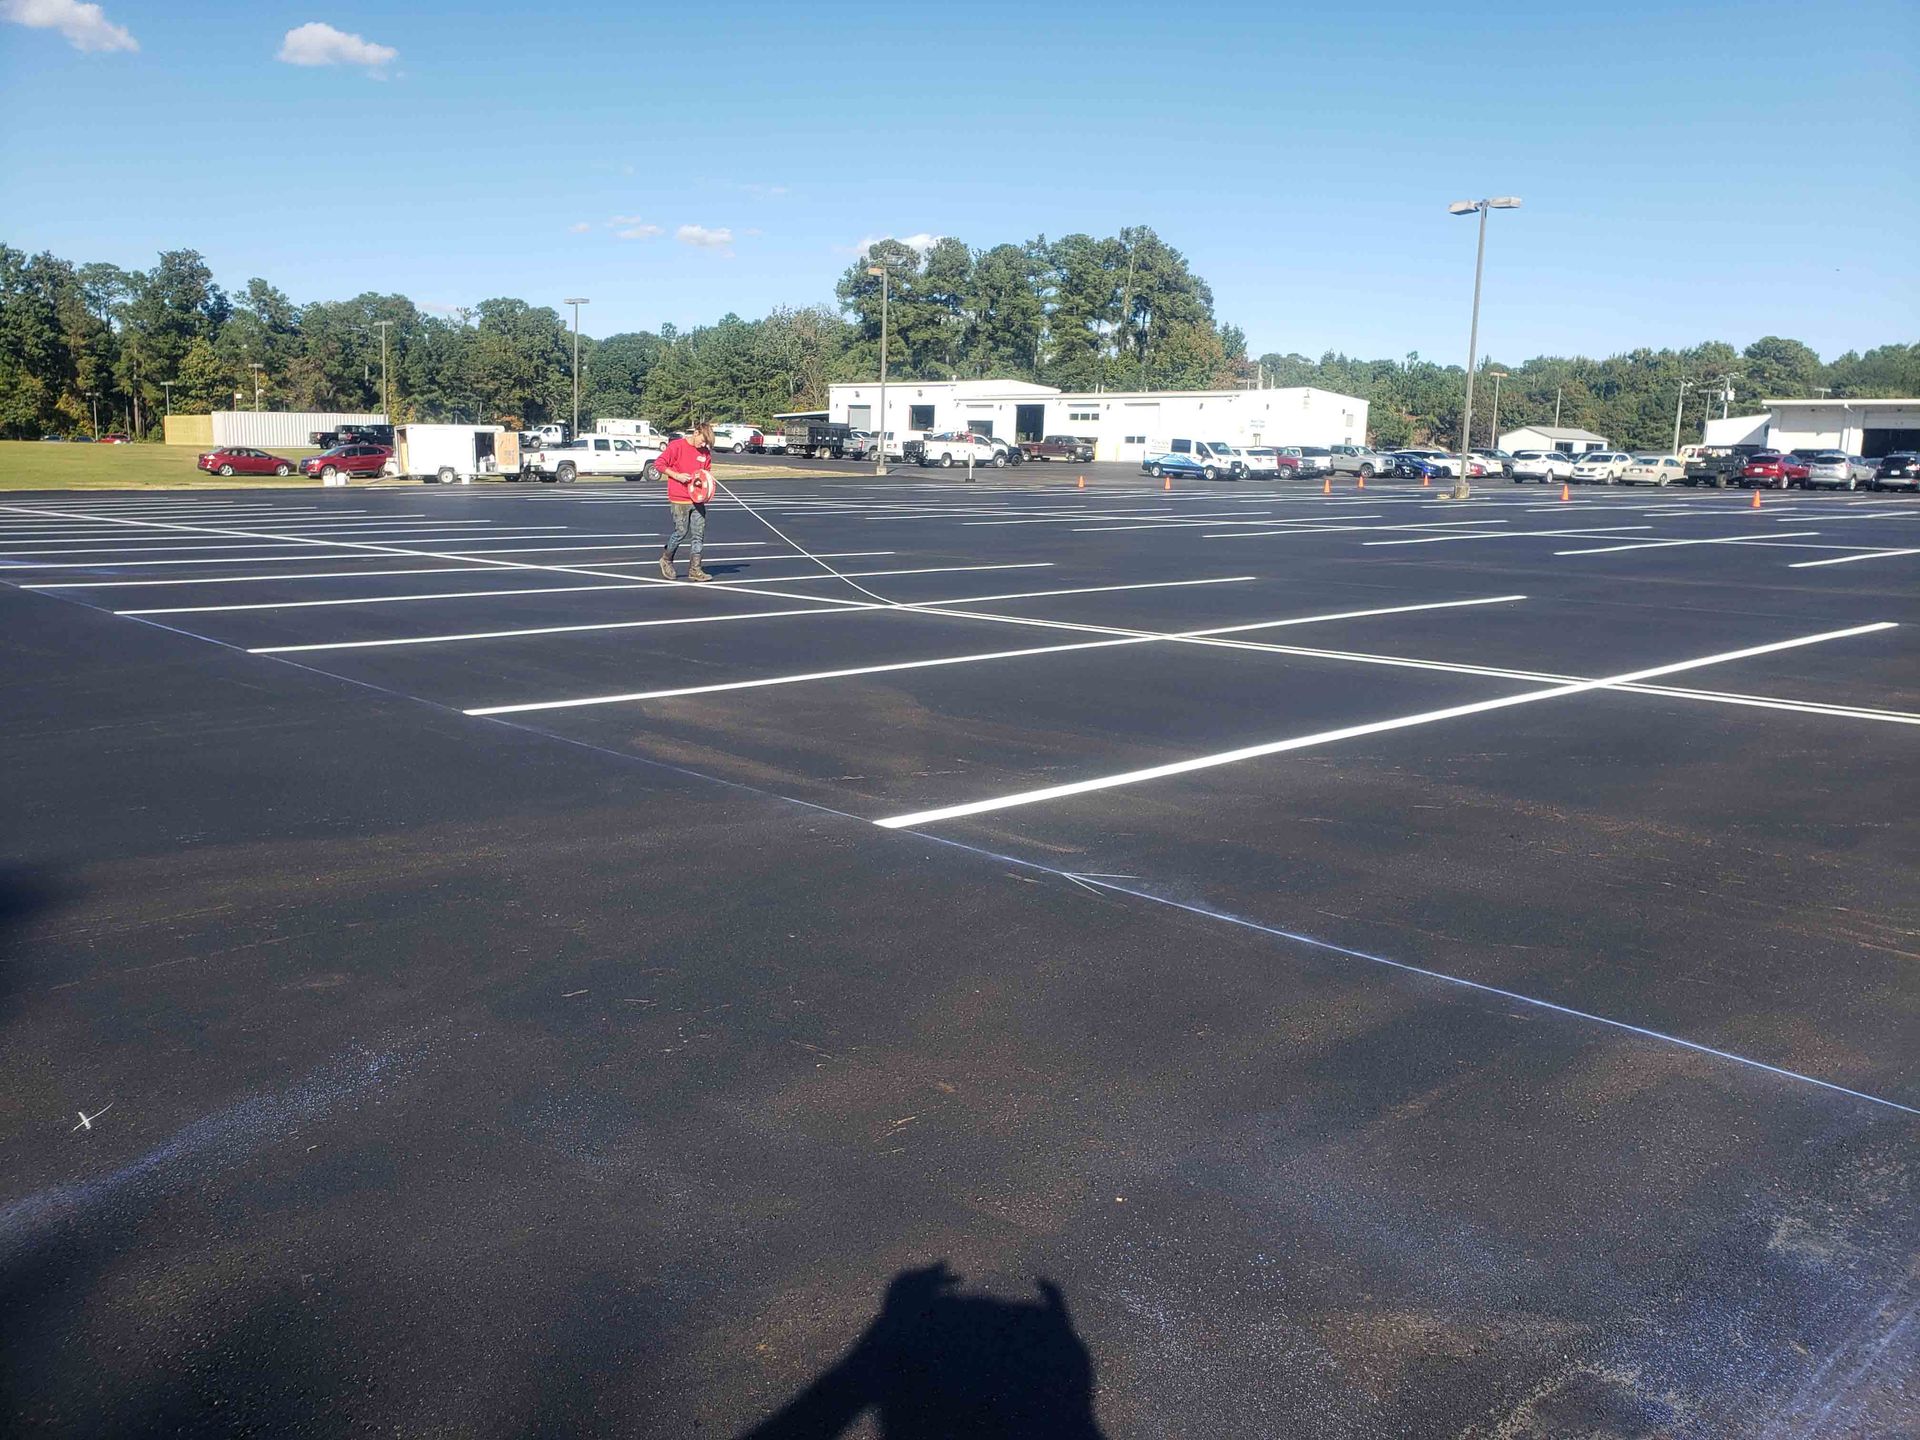 A man in a red shirt is standing in a parking lot.